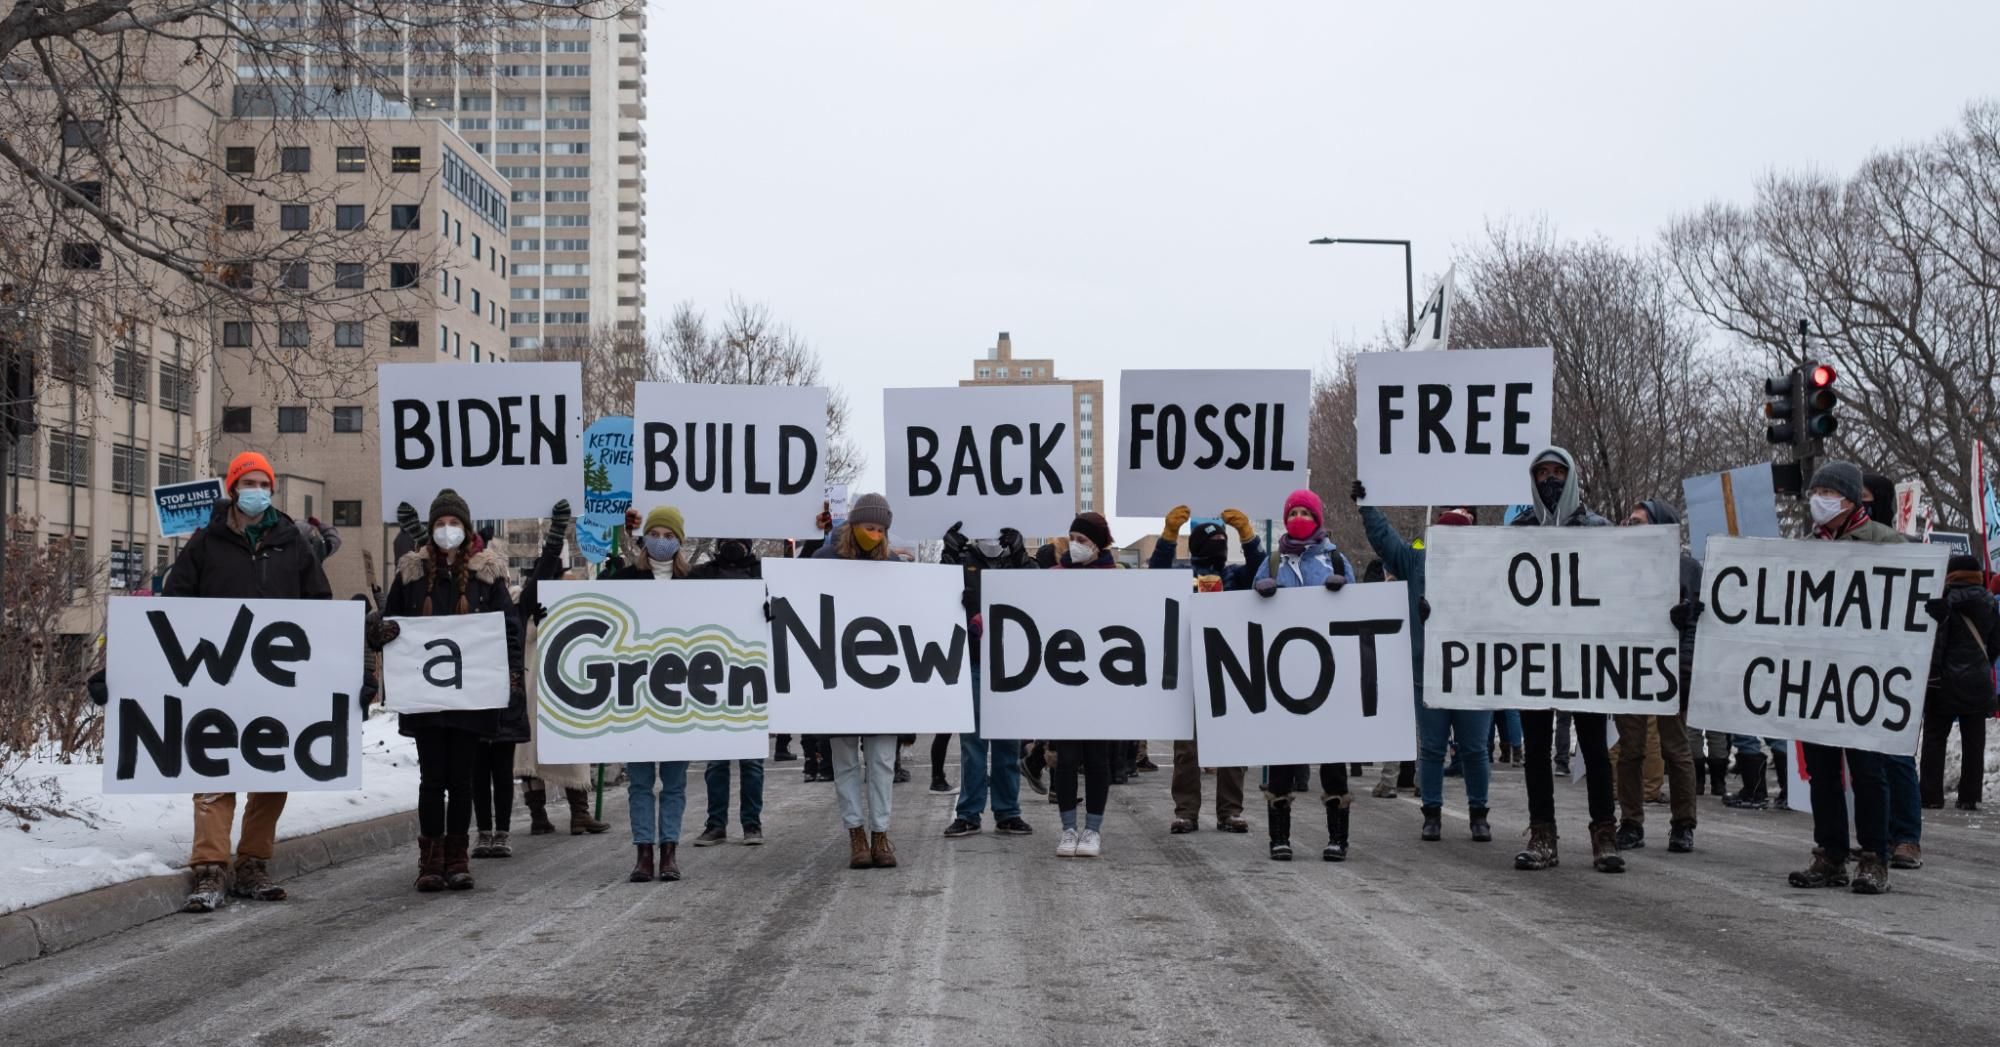 People hold signs calling for U.S. President Joe Biden to support a Green New Deal and end his support of pipelines and the fossil fuel industry in St. Paul on January 29, 2021. (Photo: Tim Evans/NurPhoto via Getty Images)